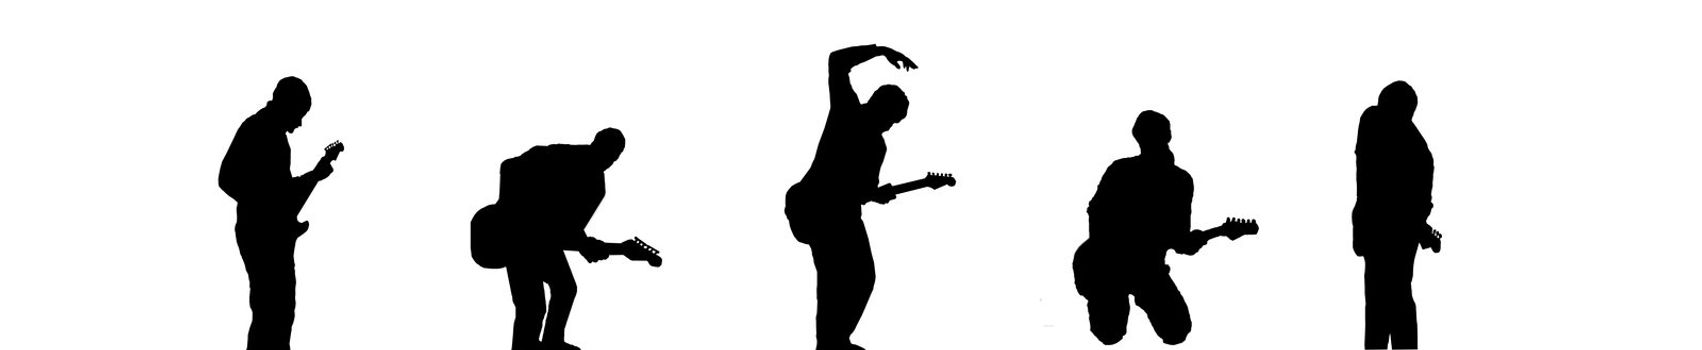 Silhouette of guitar rock band with five guitarists